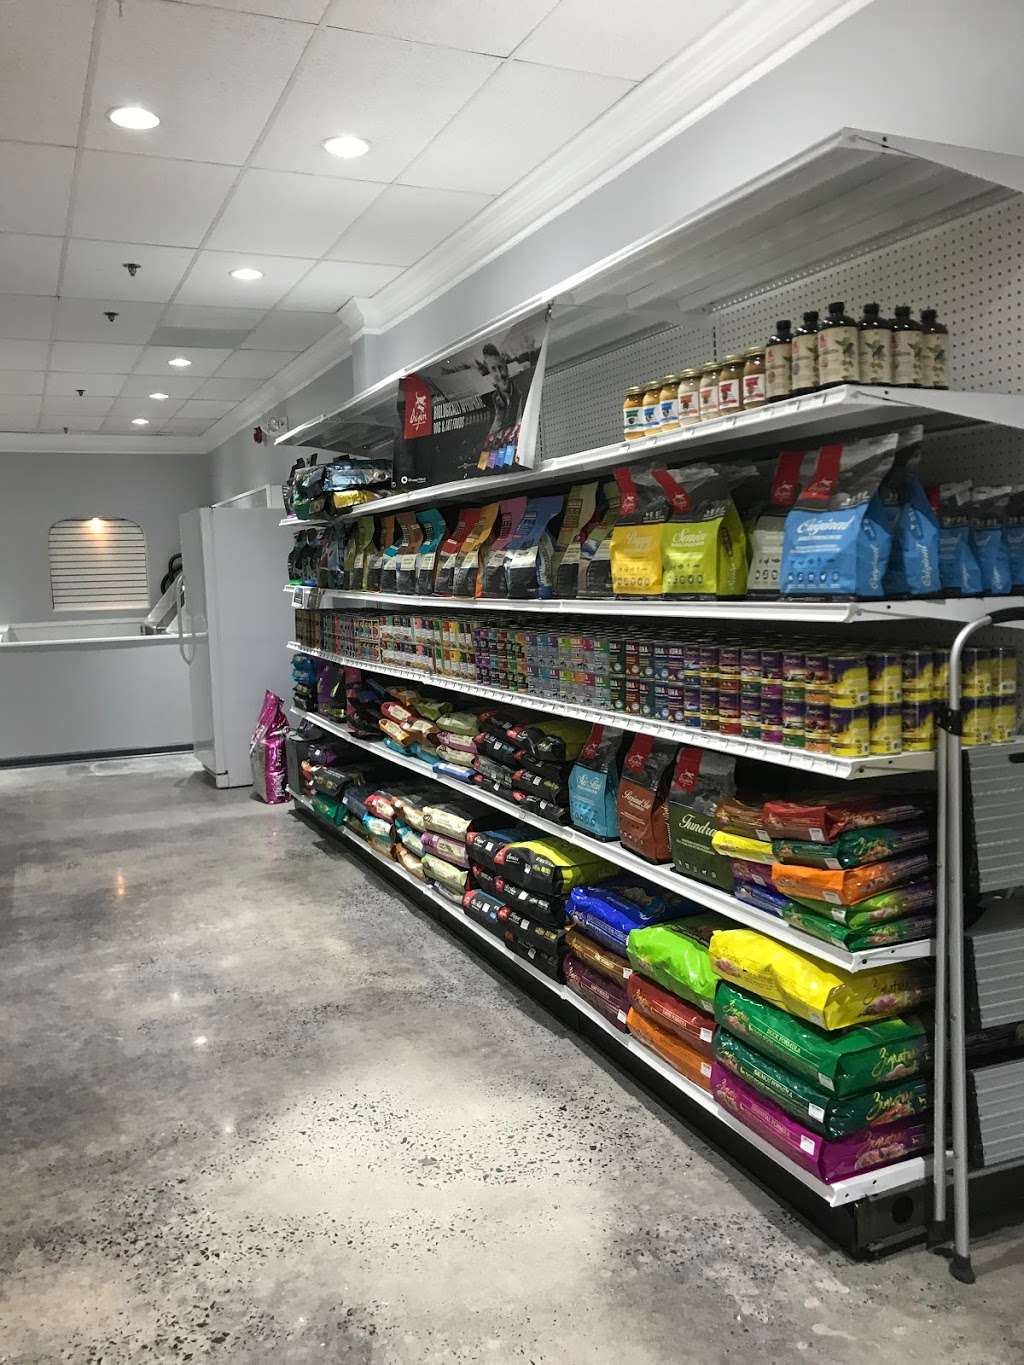 Scratch and Sniff Pet Supplies | 3336 Paper Mill Rd, Phoenix, MD 21131 | Phone: (410) 667-6433